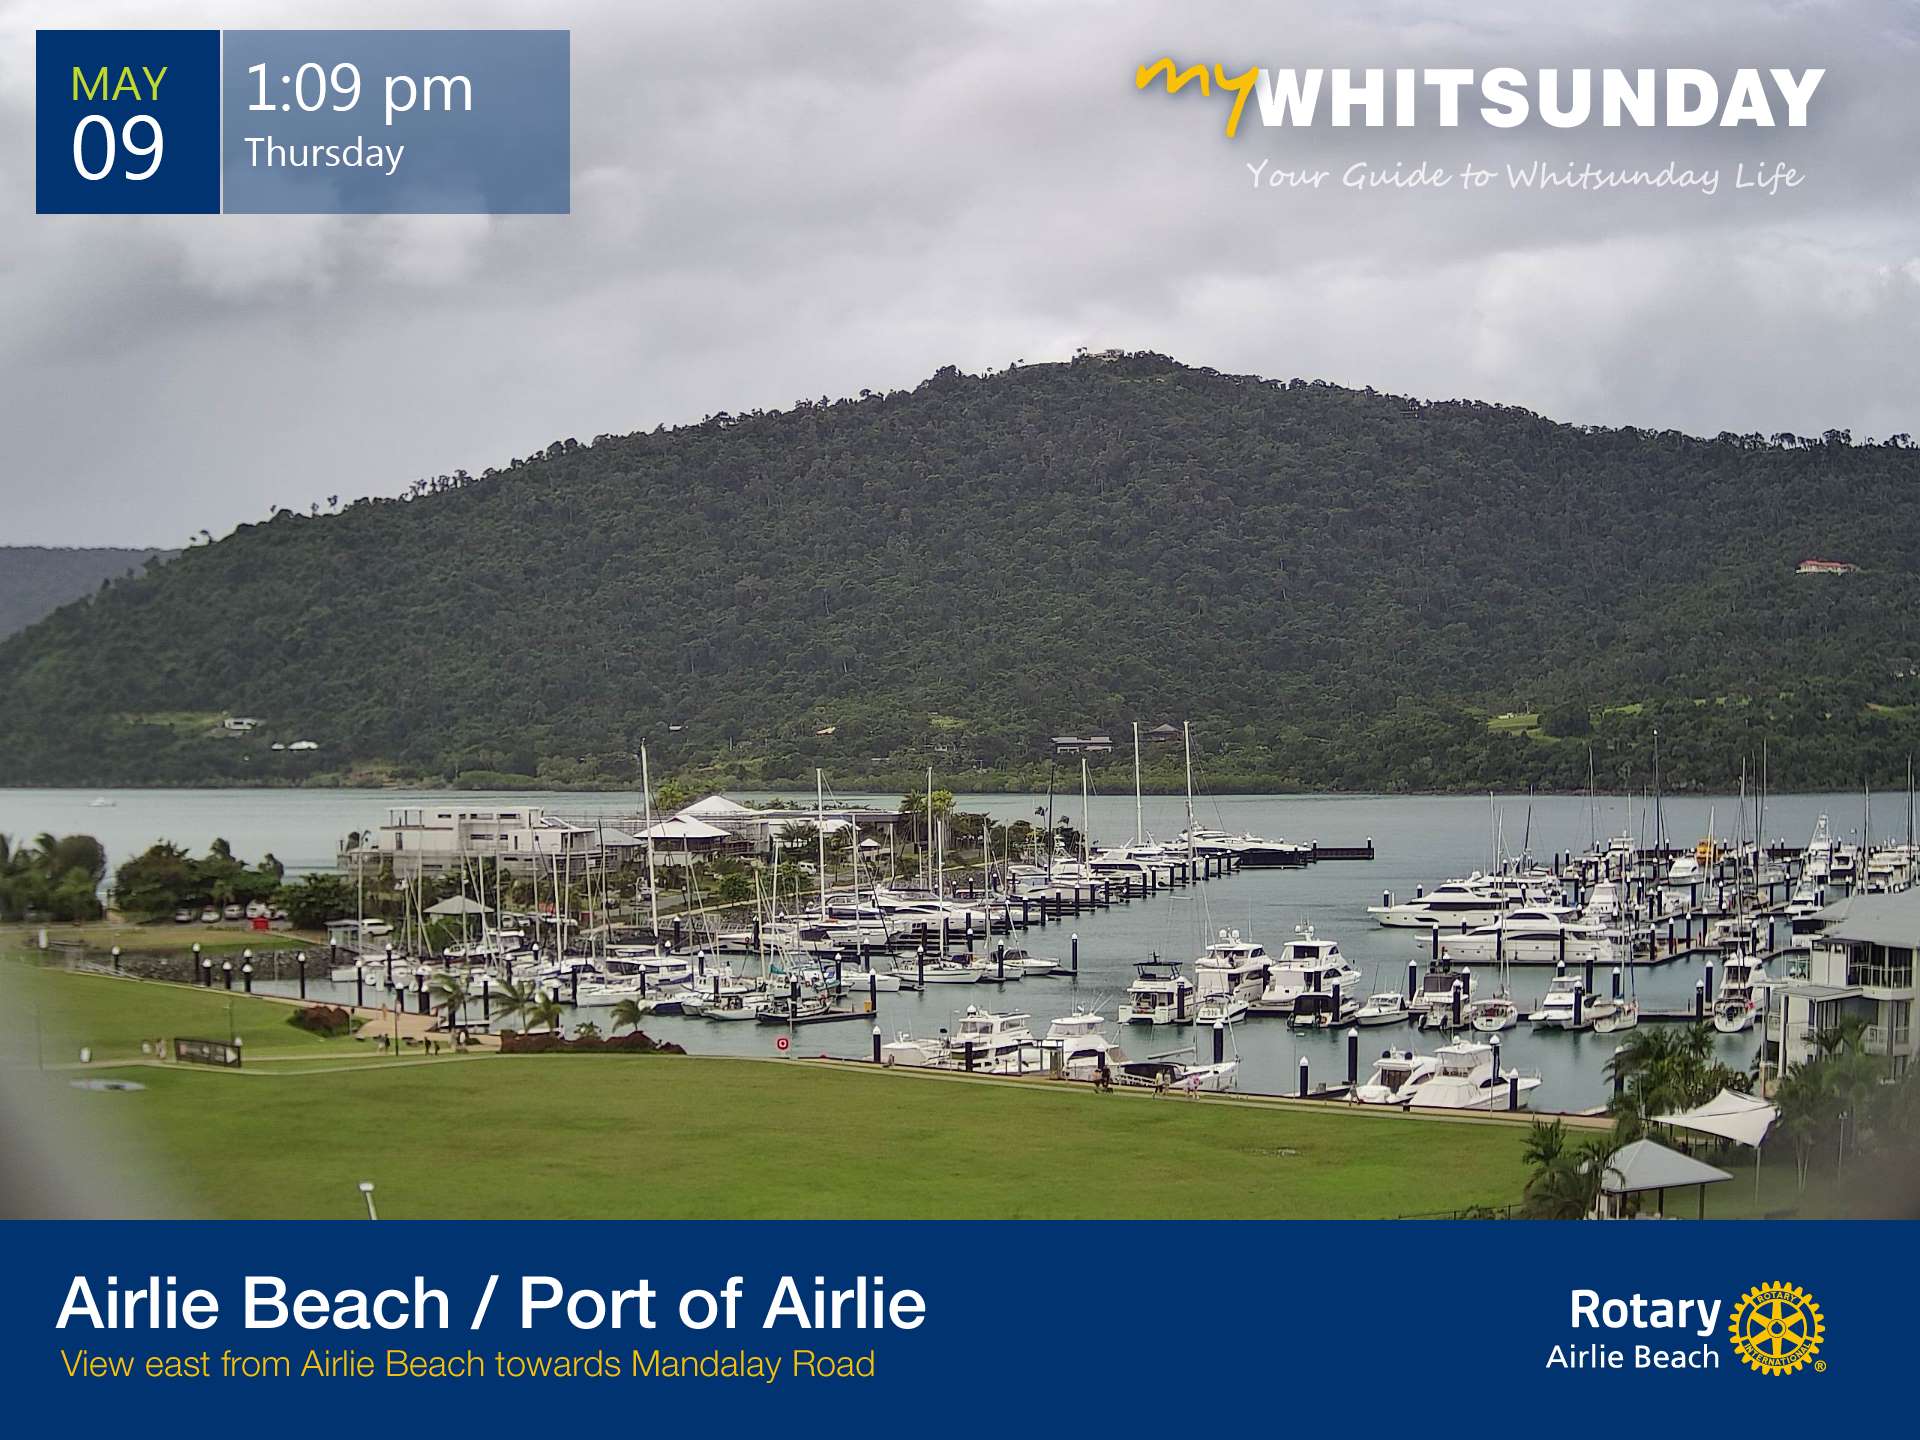 Port of Airlie @ Airlie Beach, Whitsundays